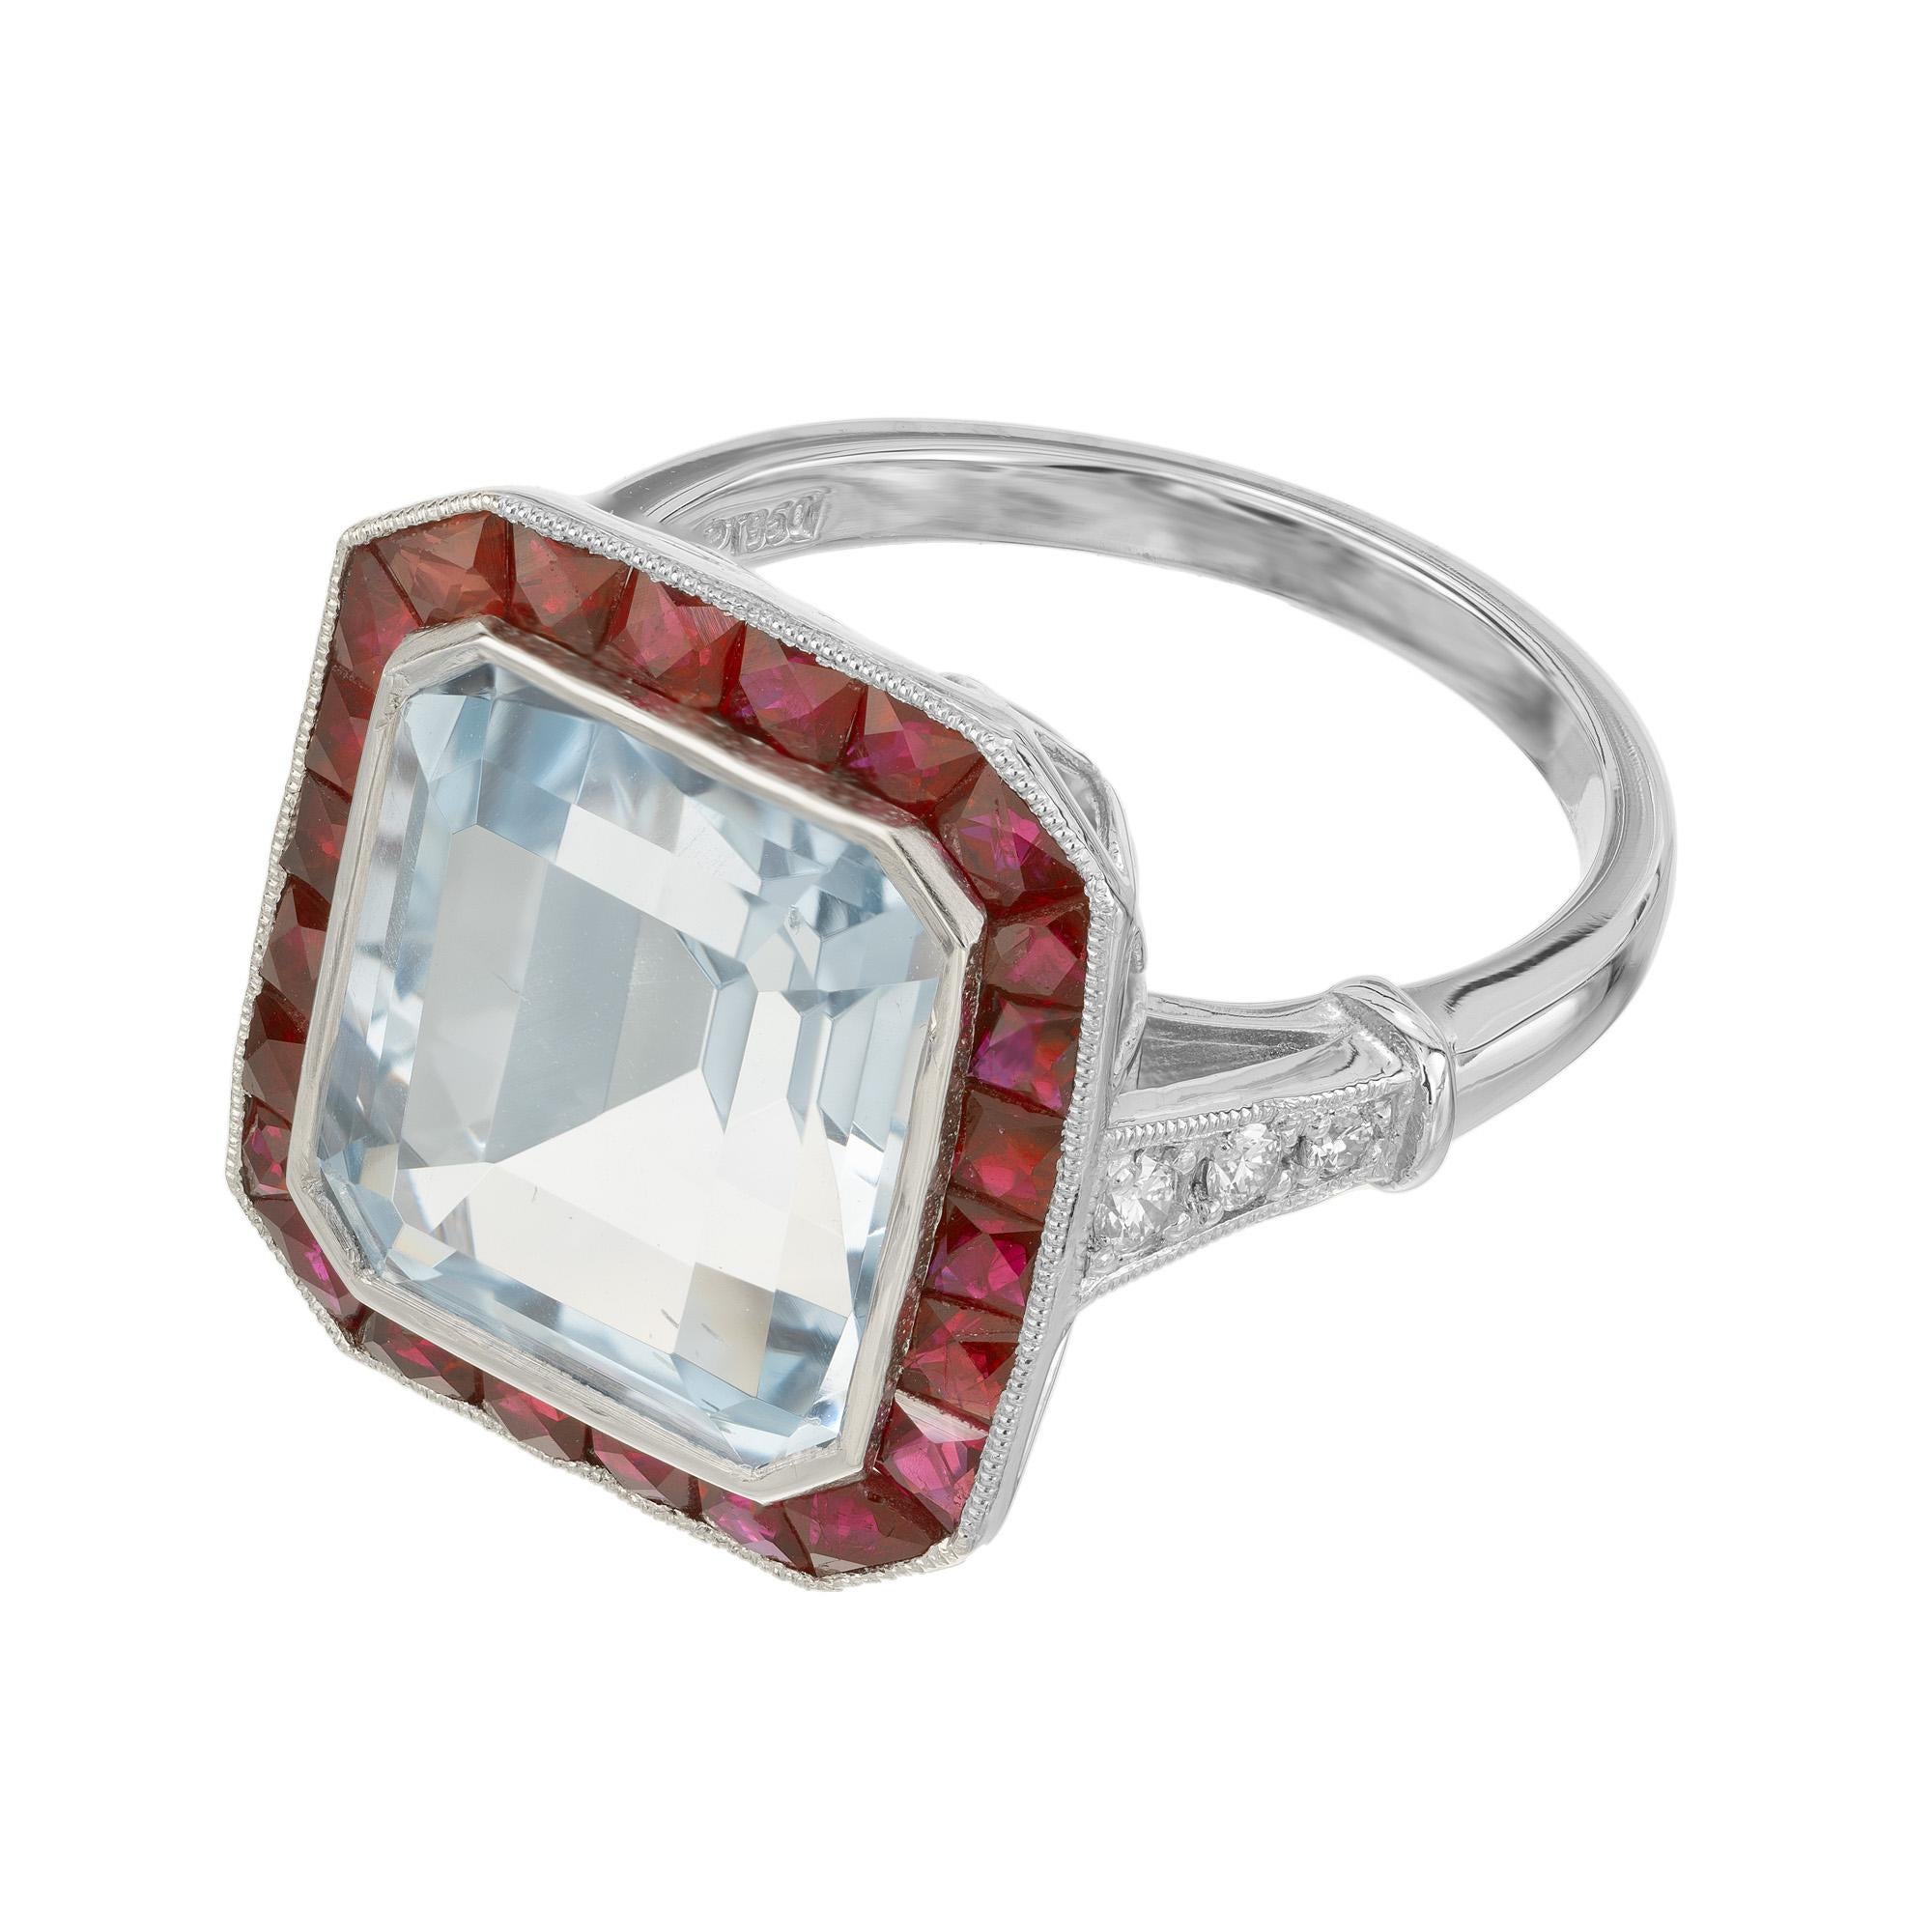 10.35 Carat Rectangle Aquamarine Ruby Diamond Platinum Engagement Ring  In Good Condition For Sale In Stamford, CT